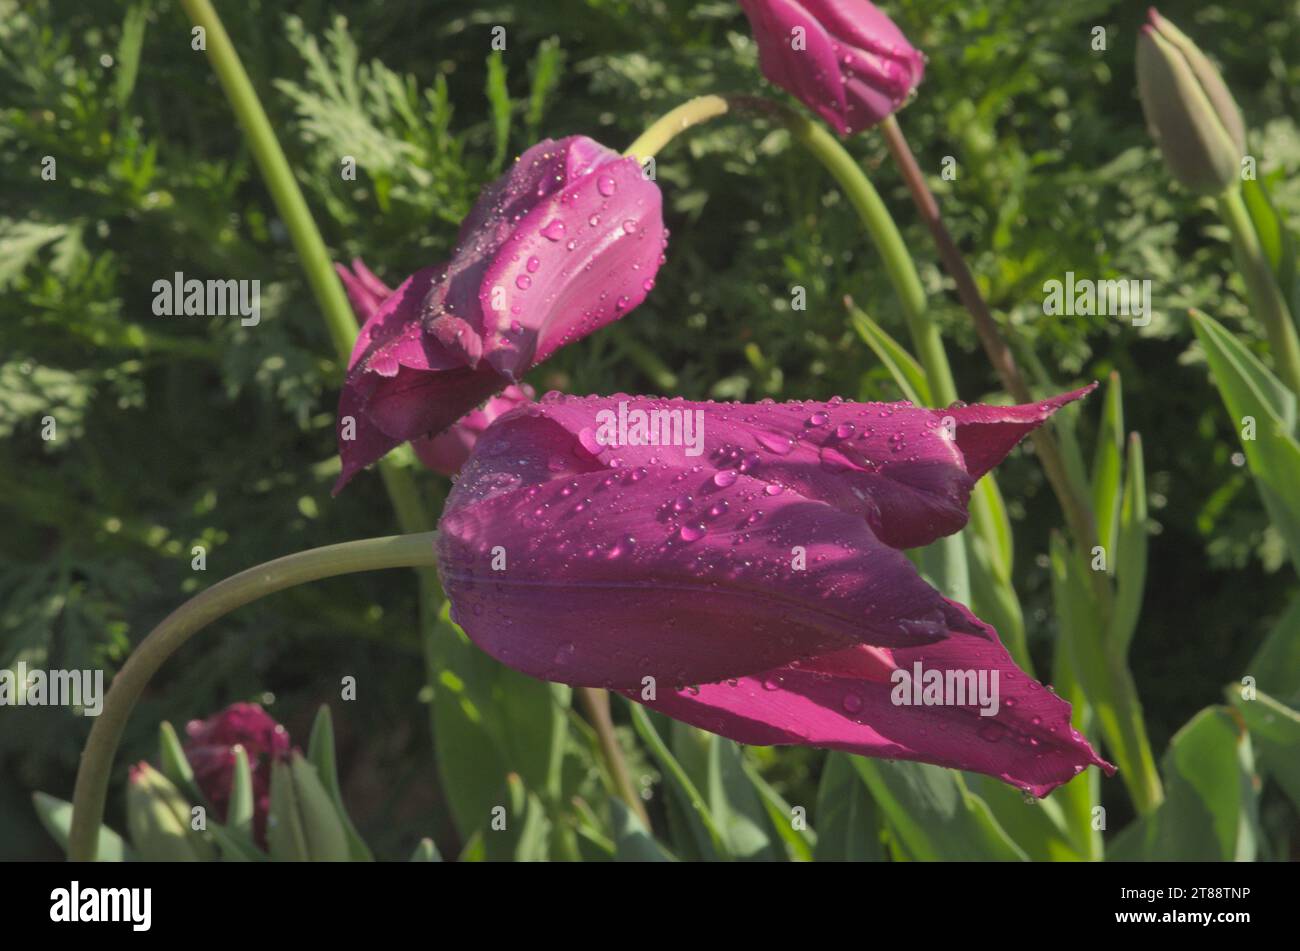 Vivid fushia ntulips, growing in garden, beauty 09f nature. Close up highlightimng it design, pattern , lines and texture. Stock Photo